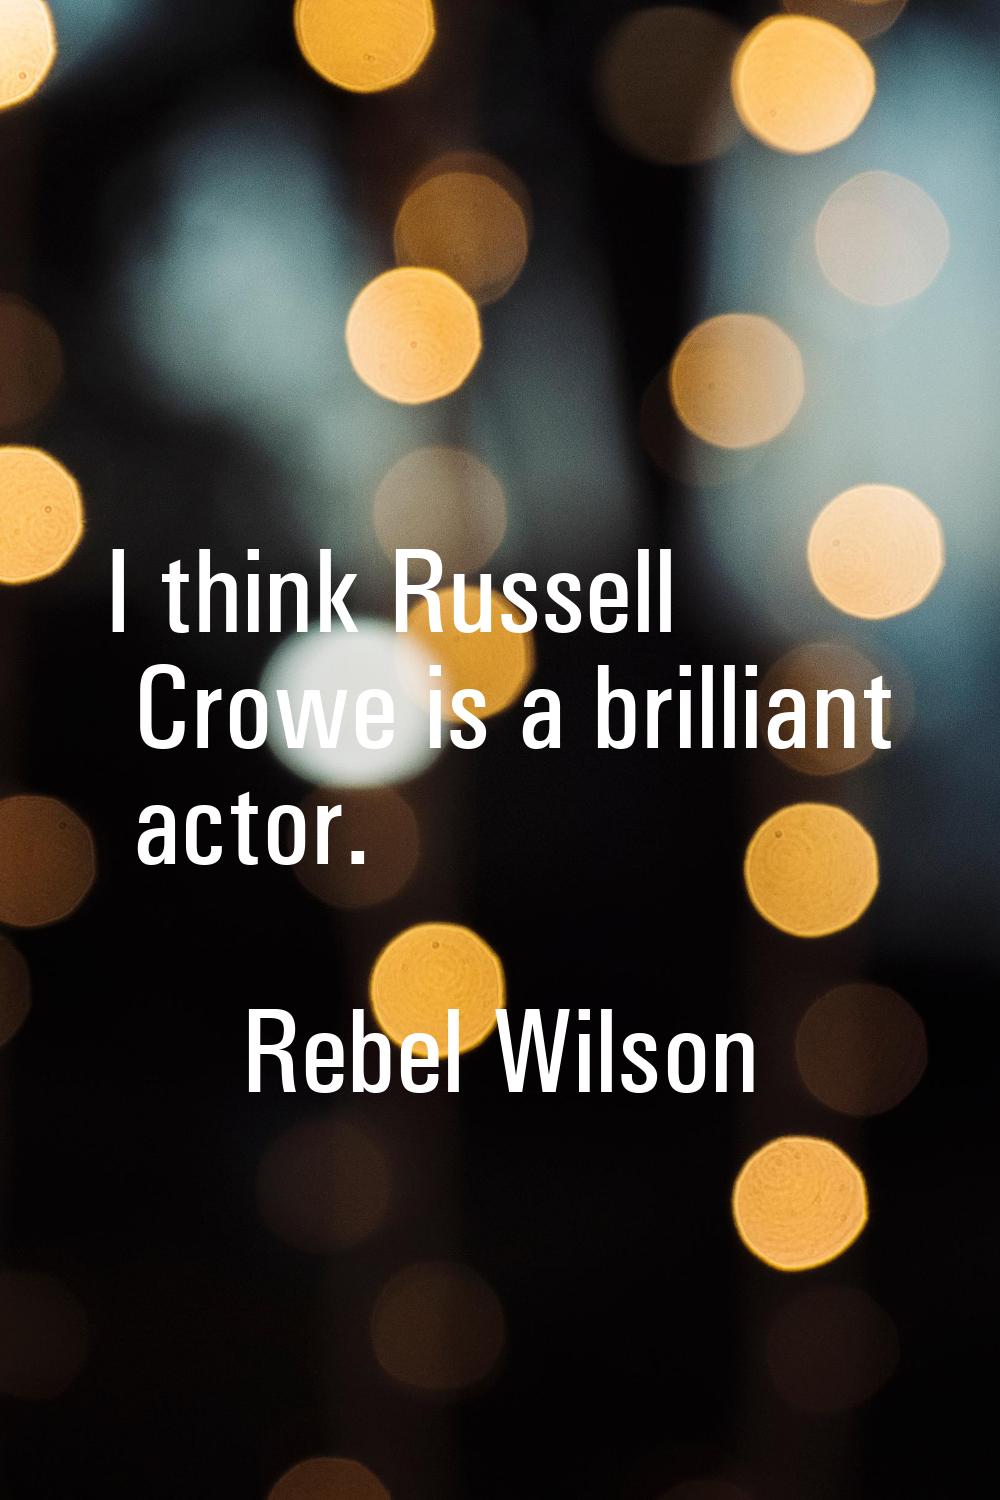 I think Russell Crowe is a brilliant actor.